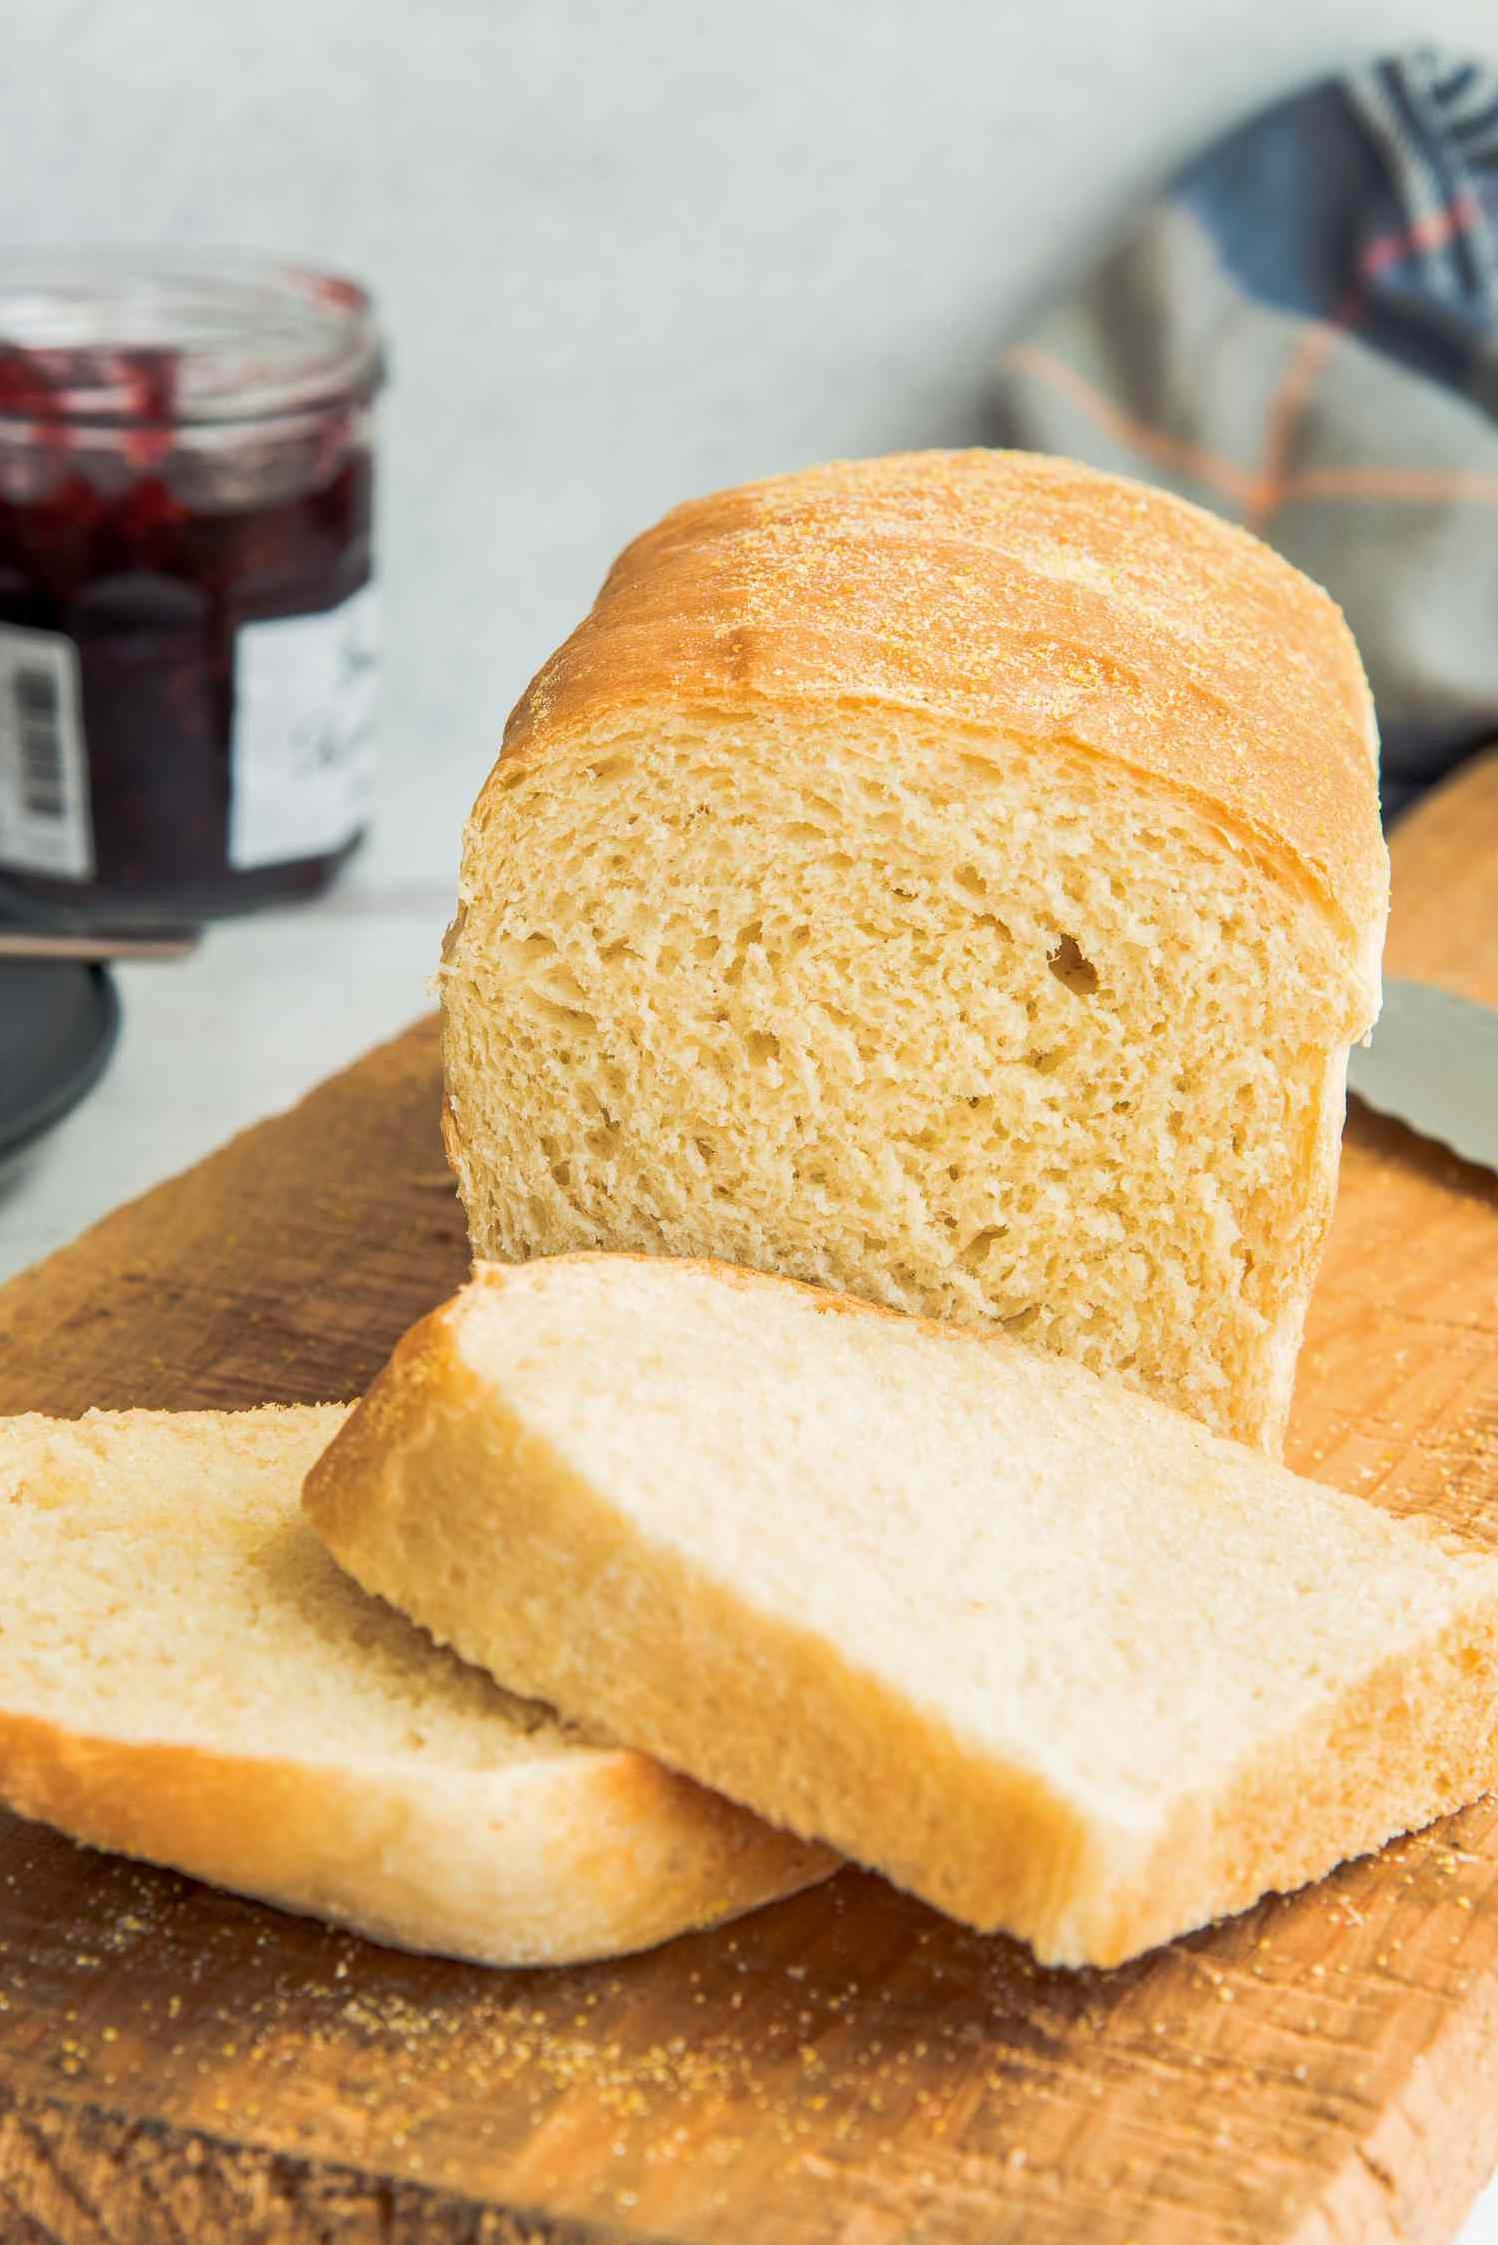  A homemade English muffin bread that fills your home with irresistible smells.